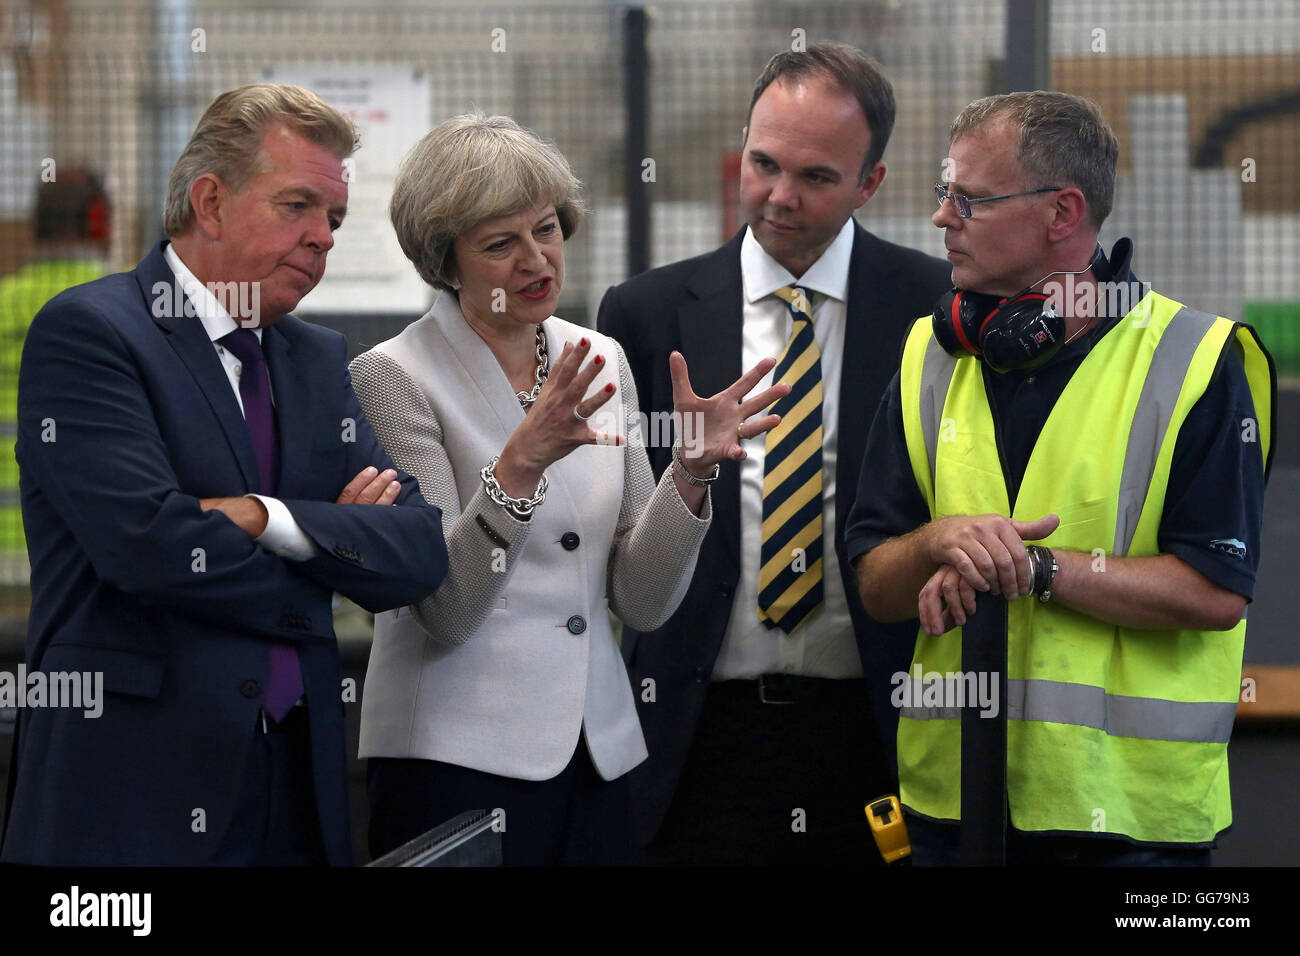 Prime Minister Theresa May with Martek Managing Director Derek Galloway (left) and Croydon Central MP Gavin Barwell (2nd right) talk to a worker during her visit to Martek joinery manufacturers in New Addington, Surrey. Stock Photo